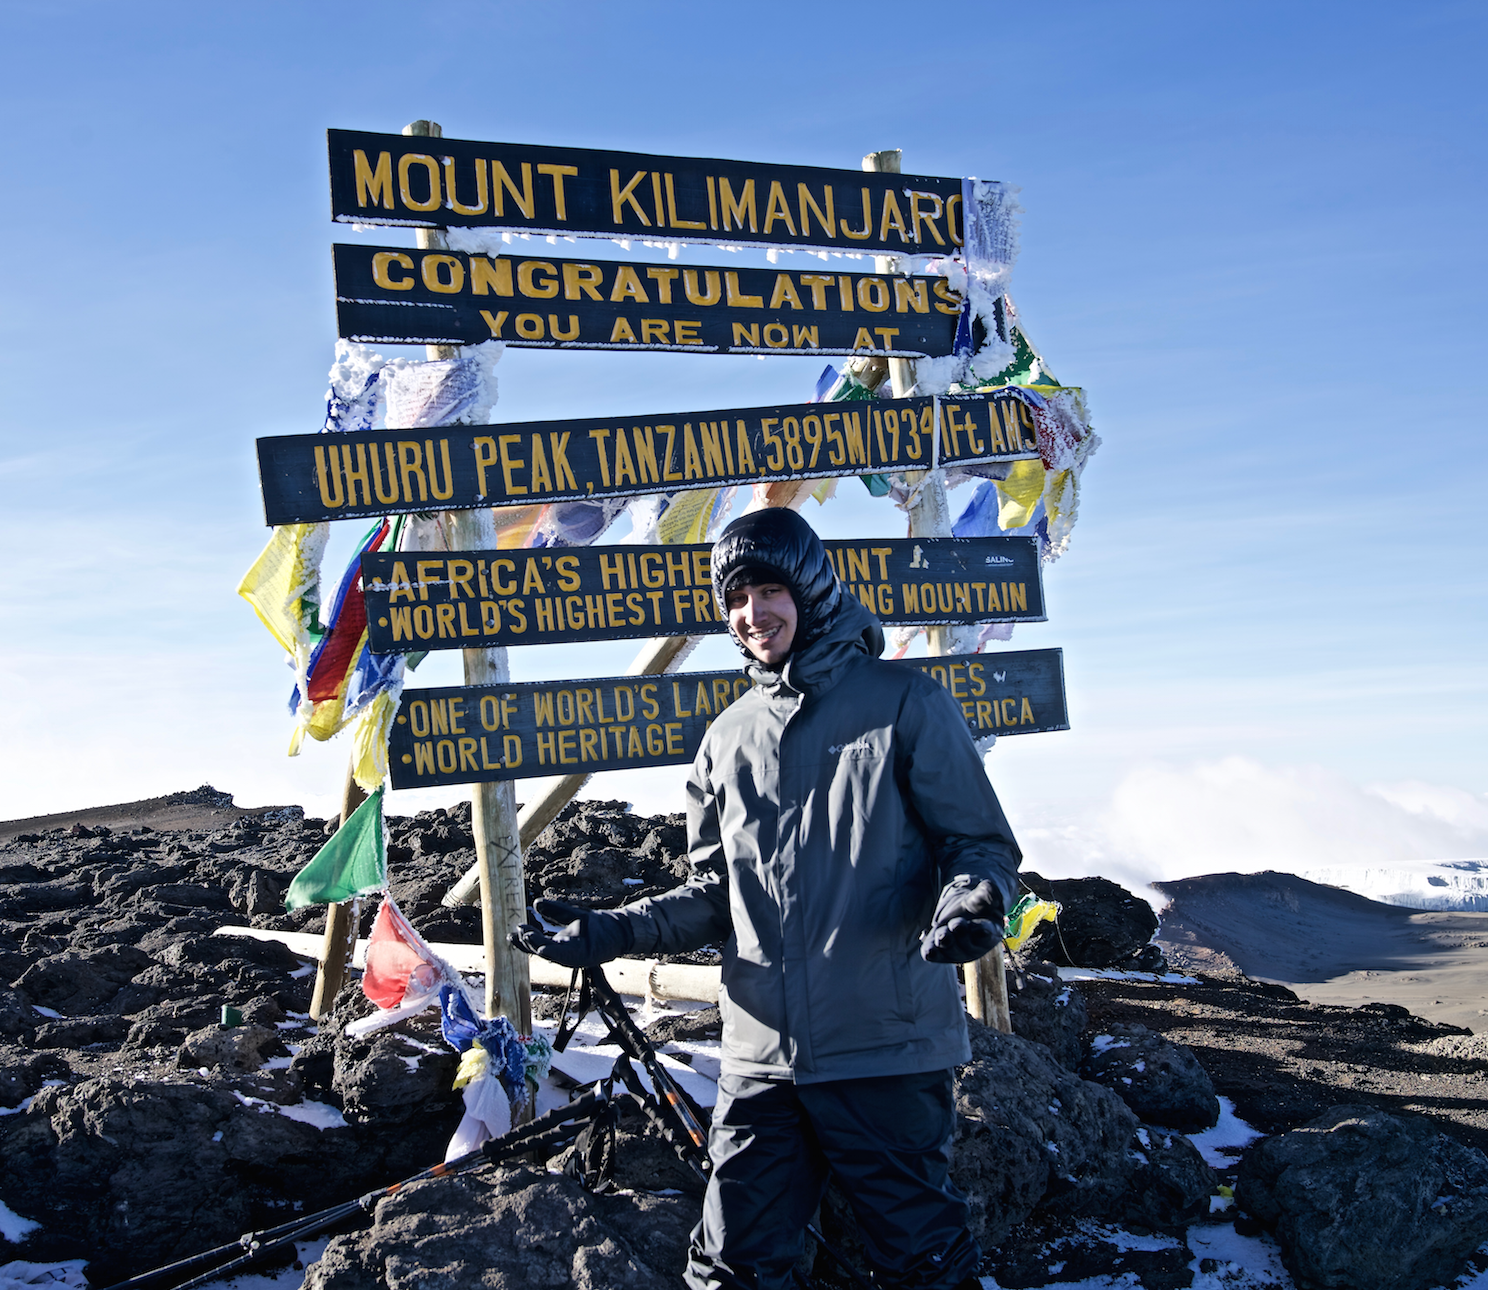  Freshman Daanyal Raja poses for a picture at the top of Mount Kilimanjaro. He made this climb with his family last December. Photo used with permission of Saeed Raja.